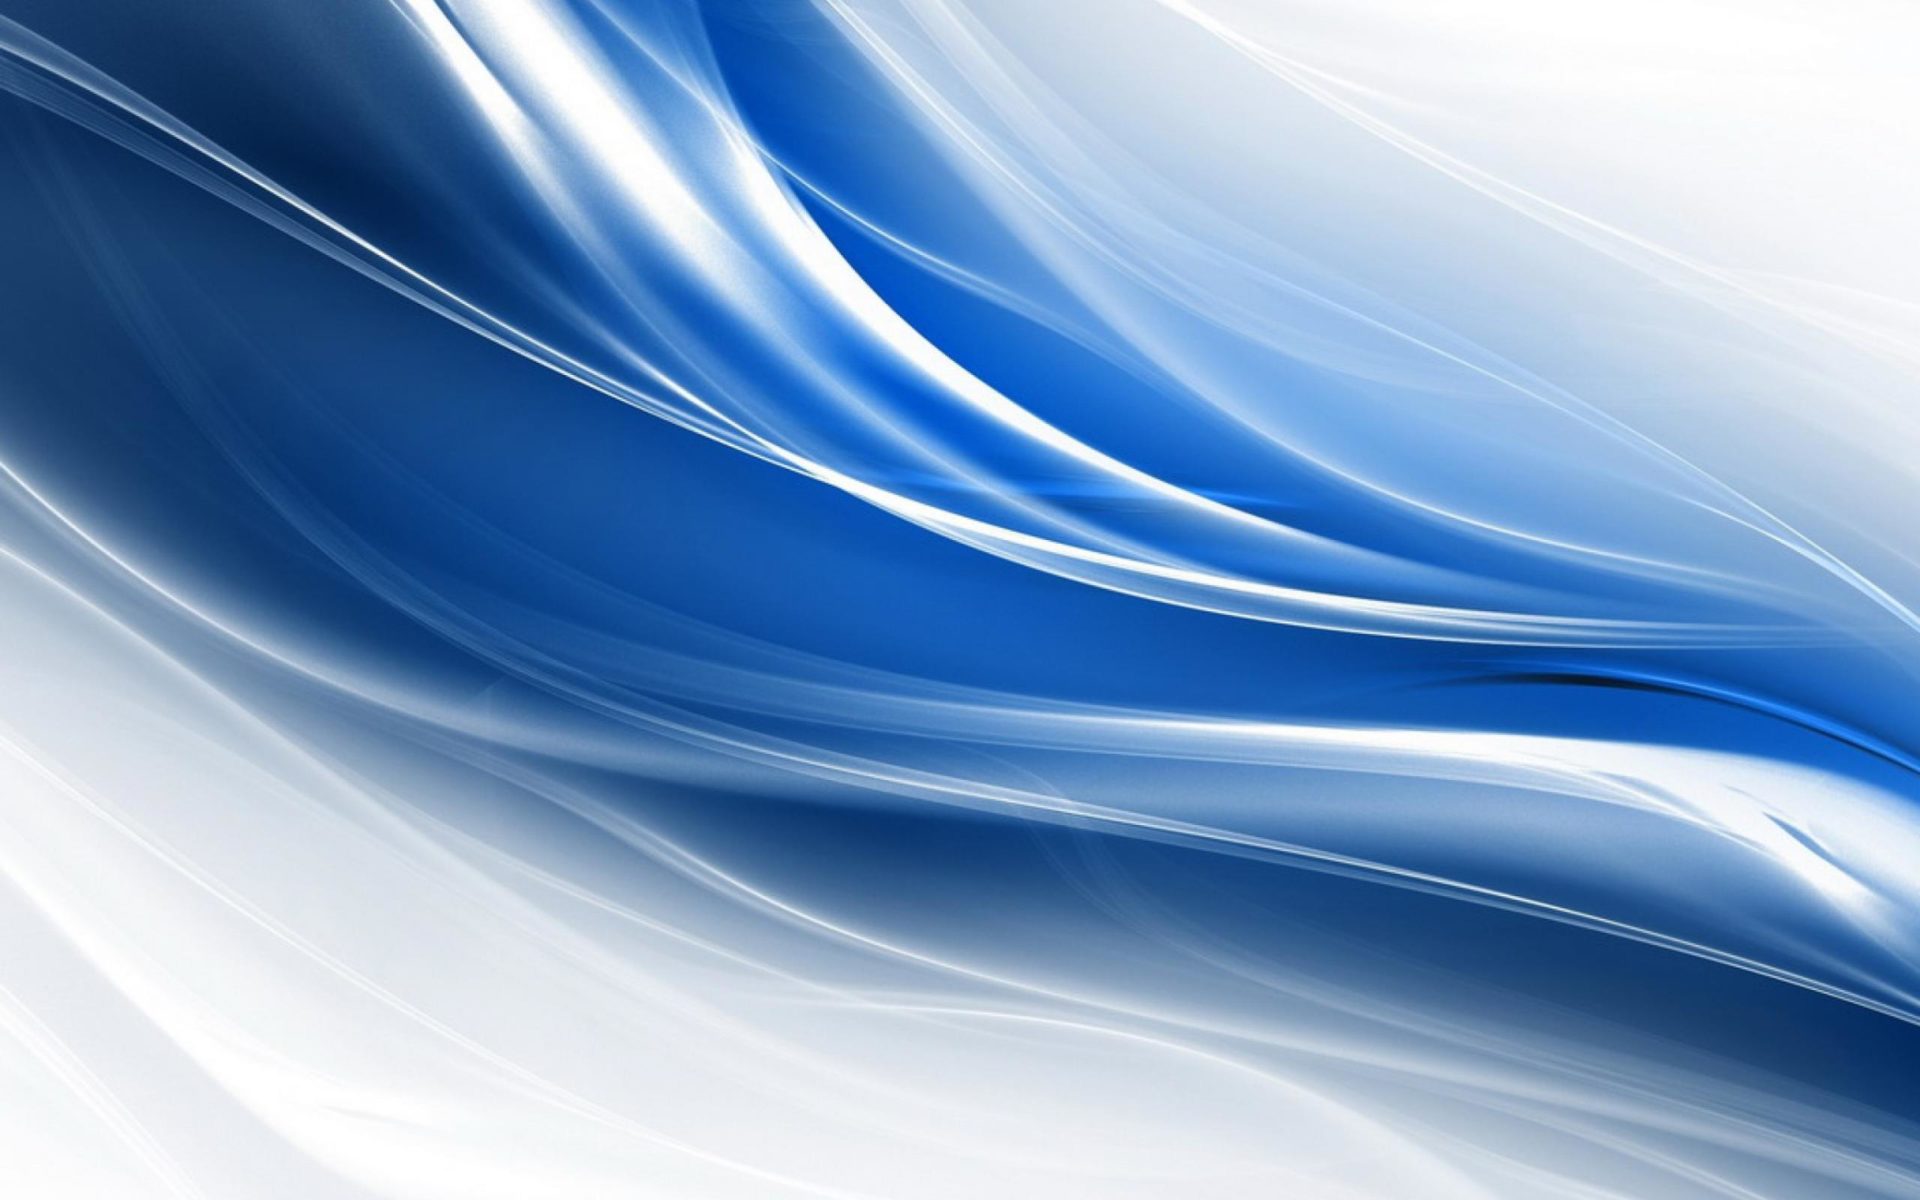 Simple Blue Abstract Wallpaper HD Wallpapers Backgrounds Images